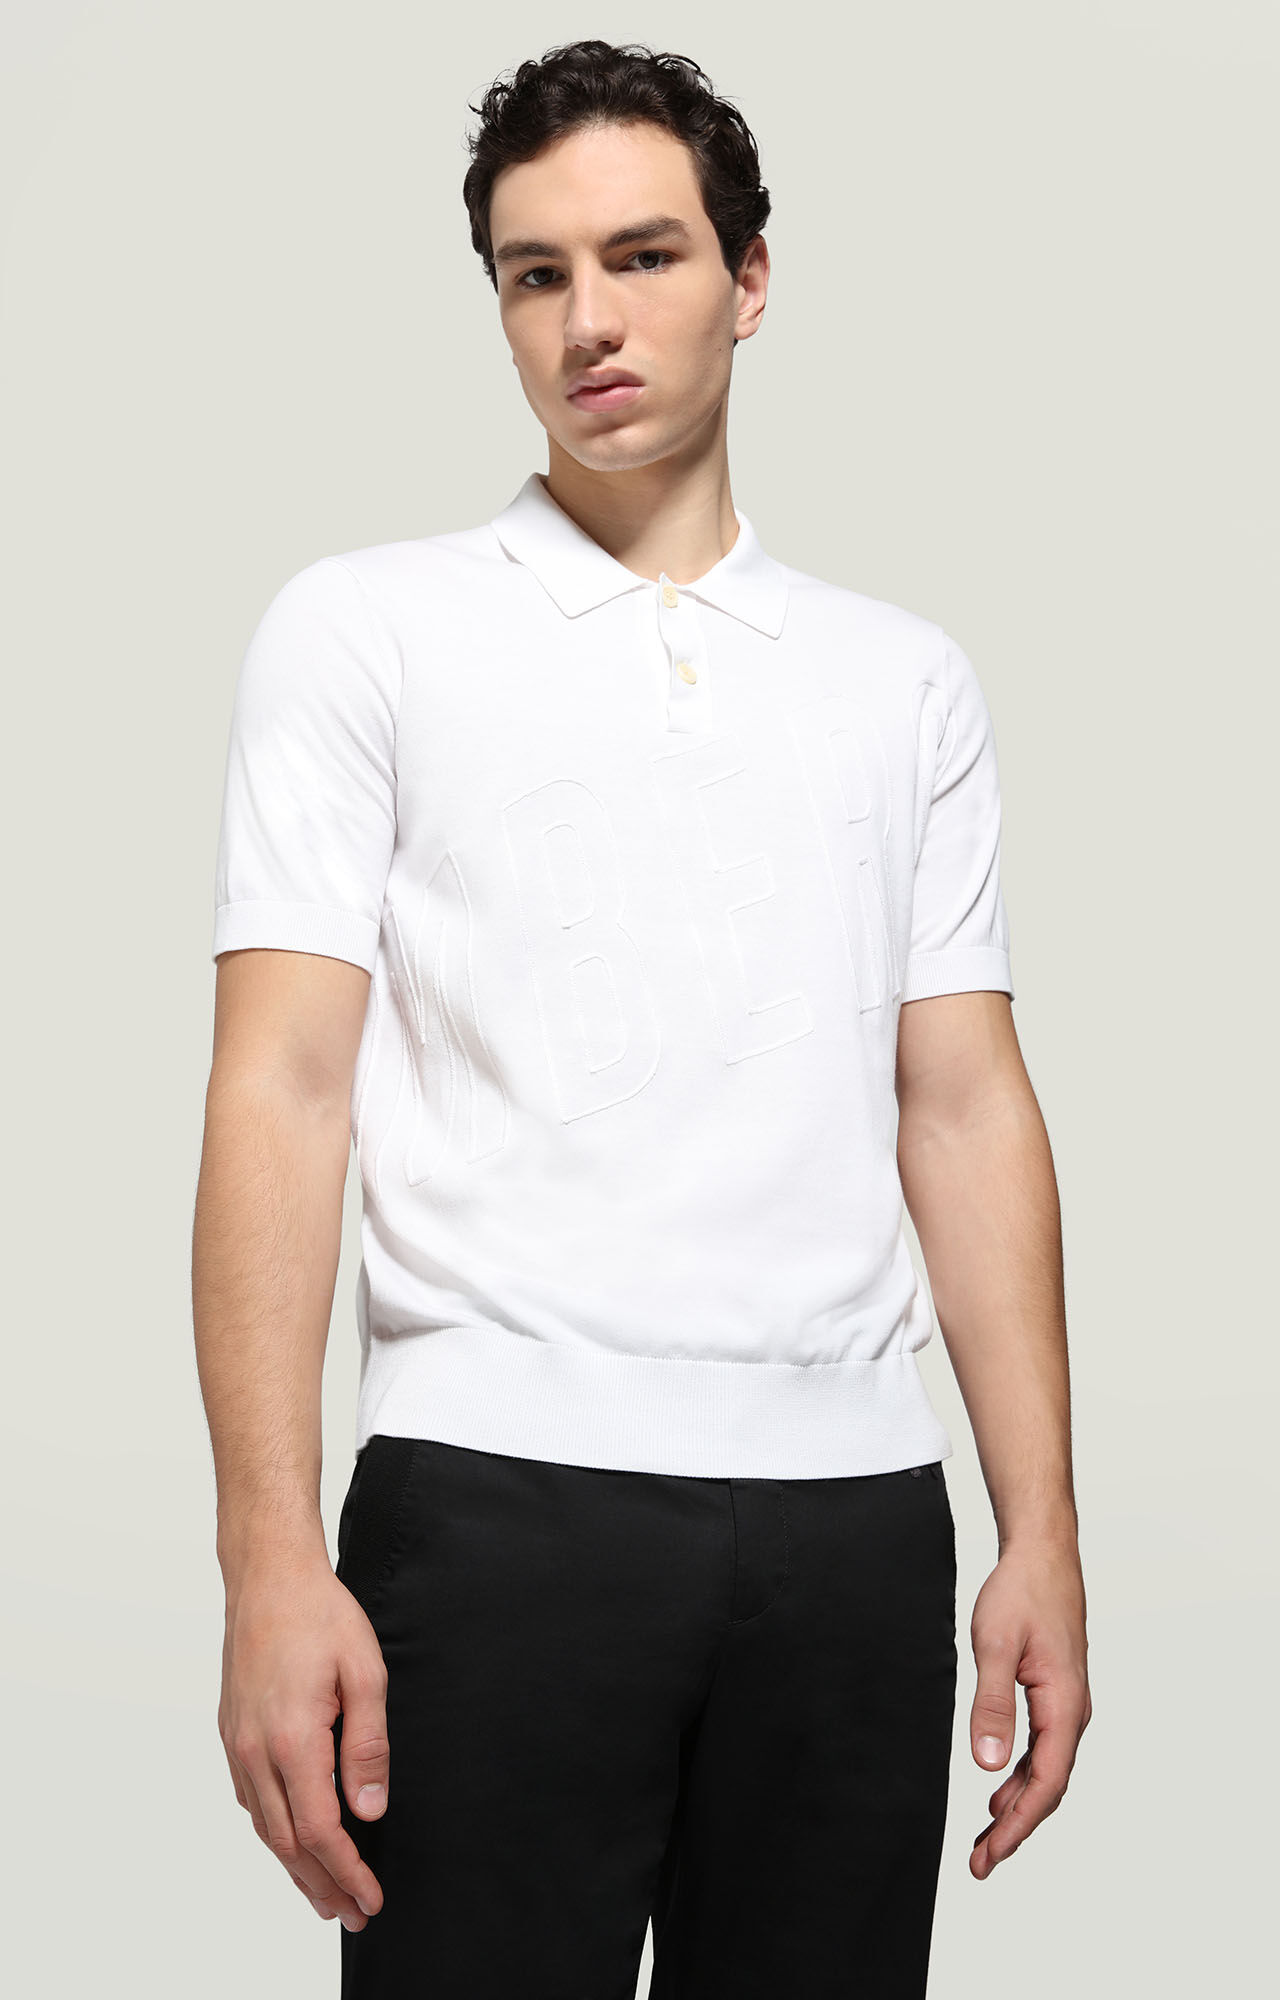 Men's polo shirts asymmetrical and printed | Bikkembergs